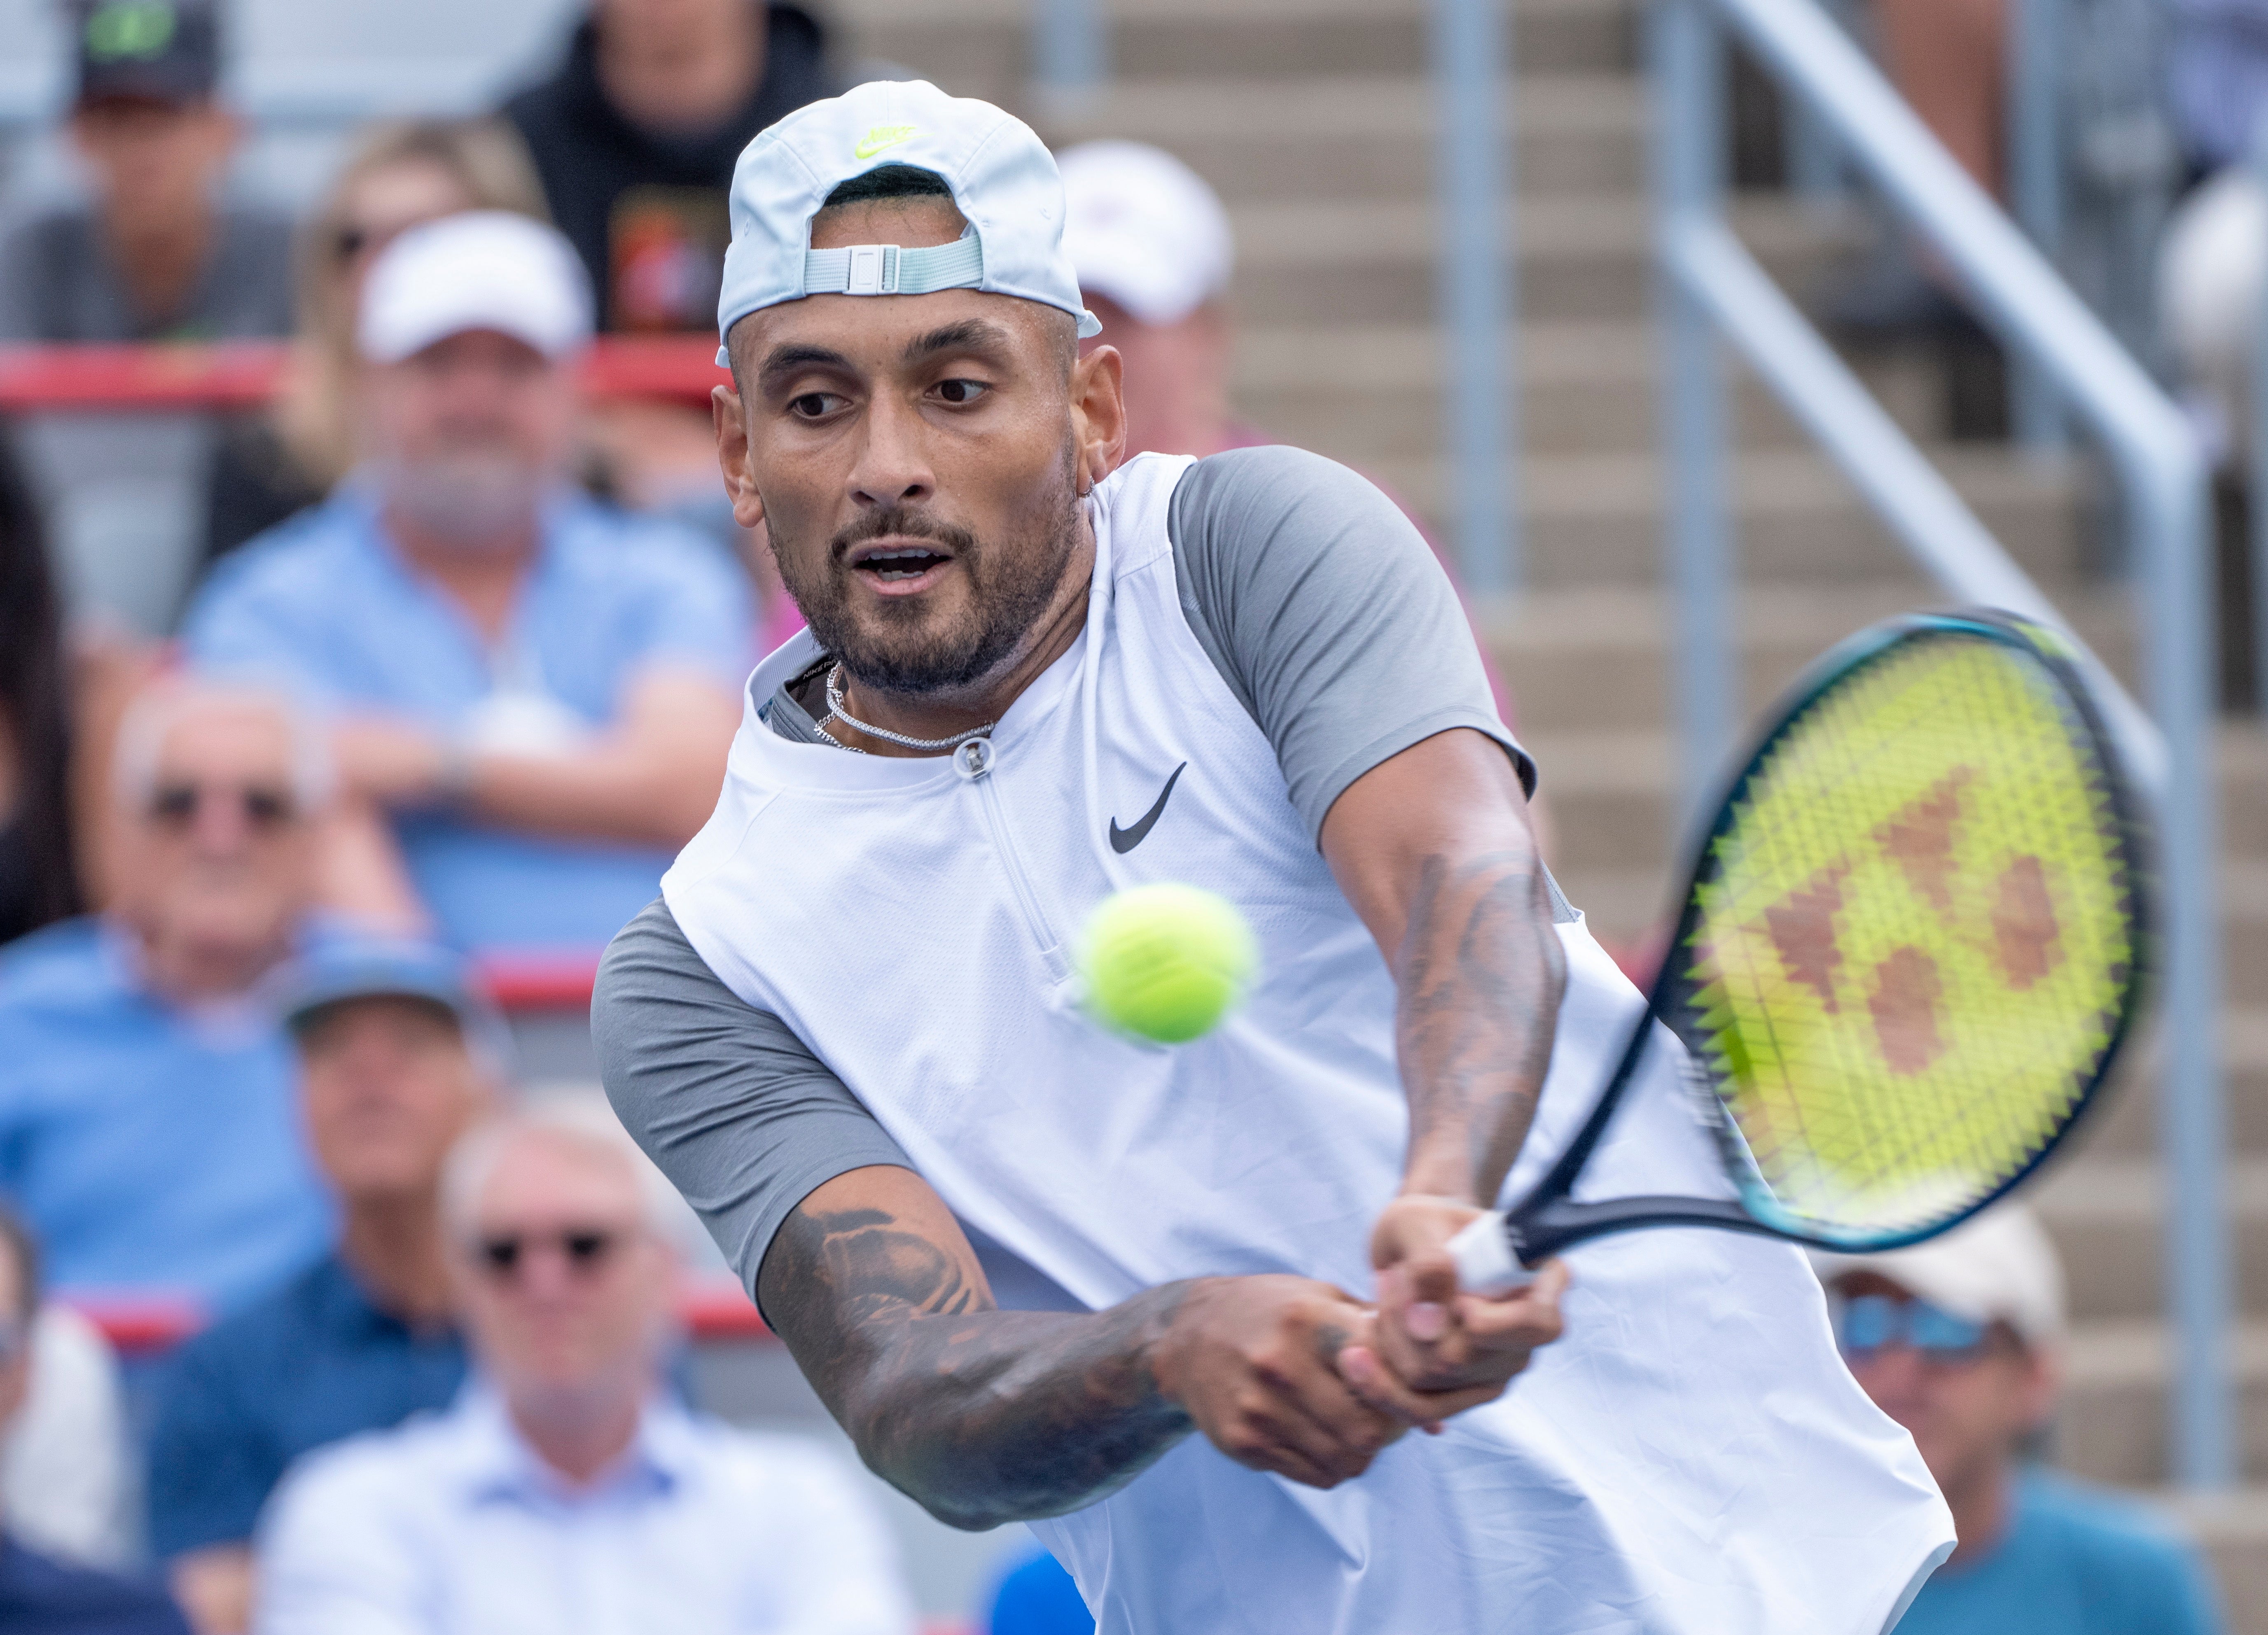 Wimbledon fan taking legal action against Nick Kyrgios The Independent